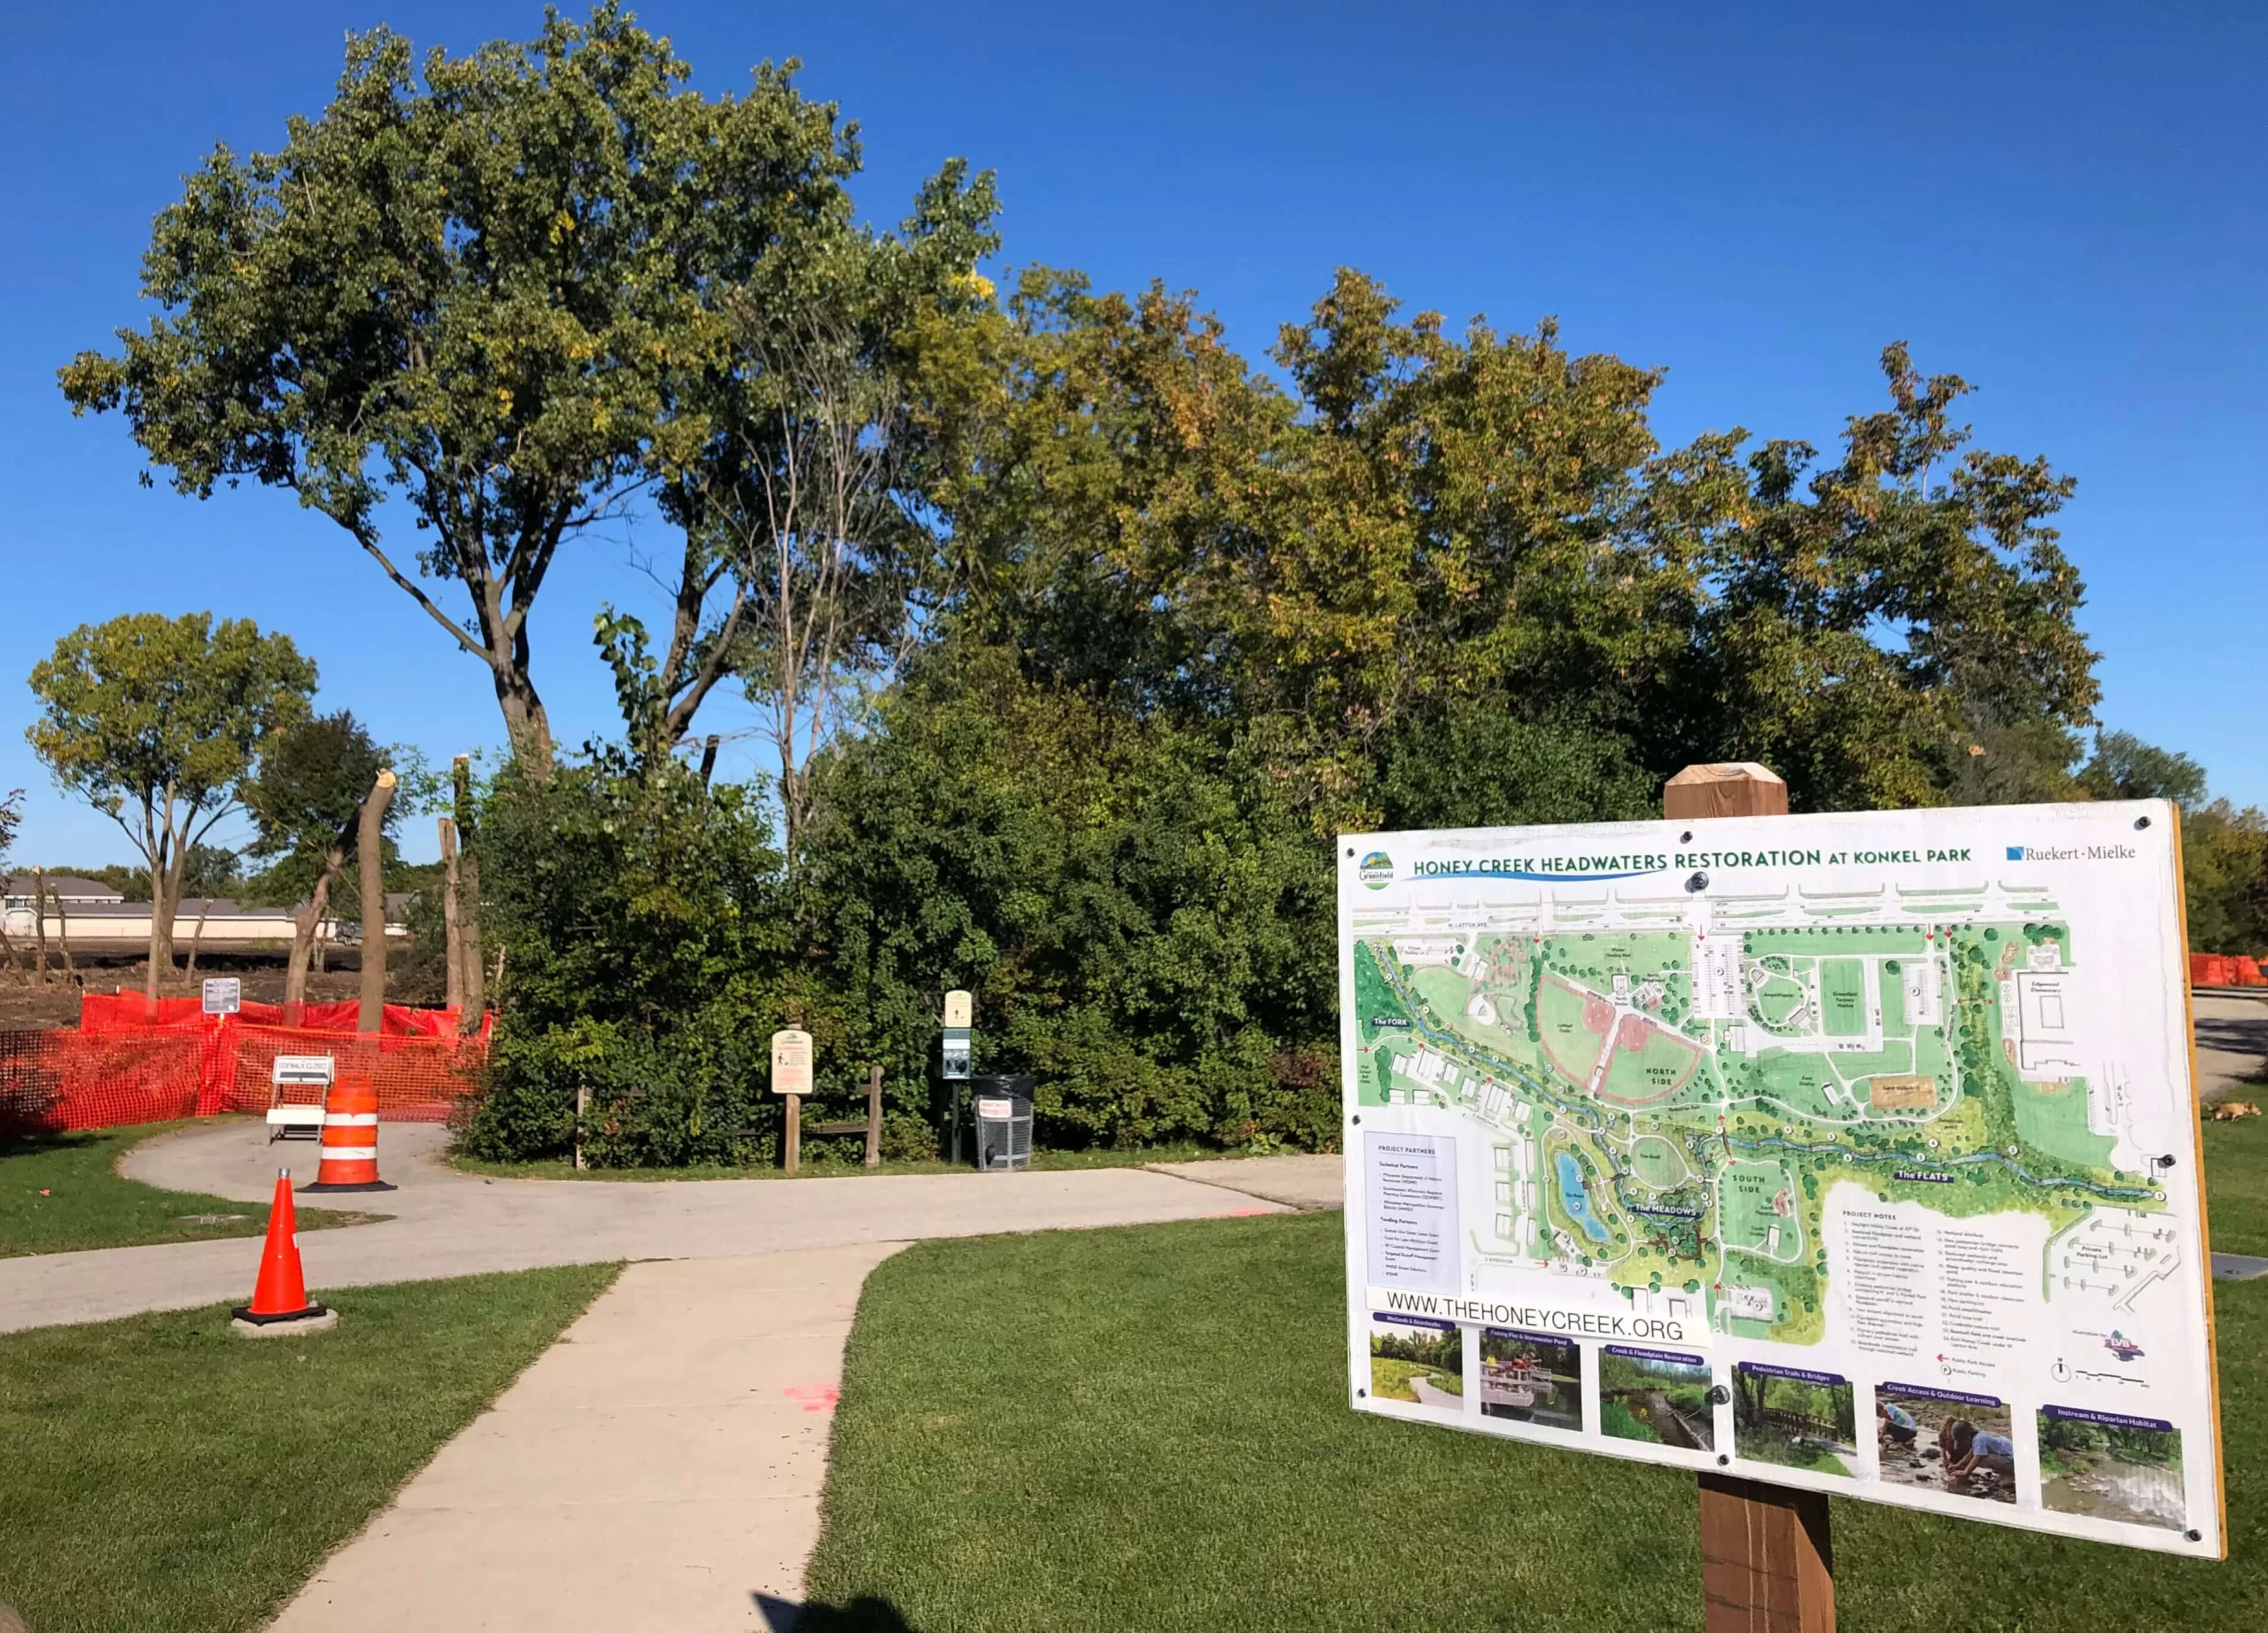 Illustrated Park map depicting river and park improvements under construction at a city park in Wisconsin.